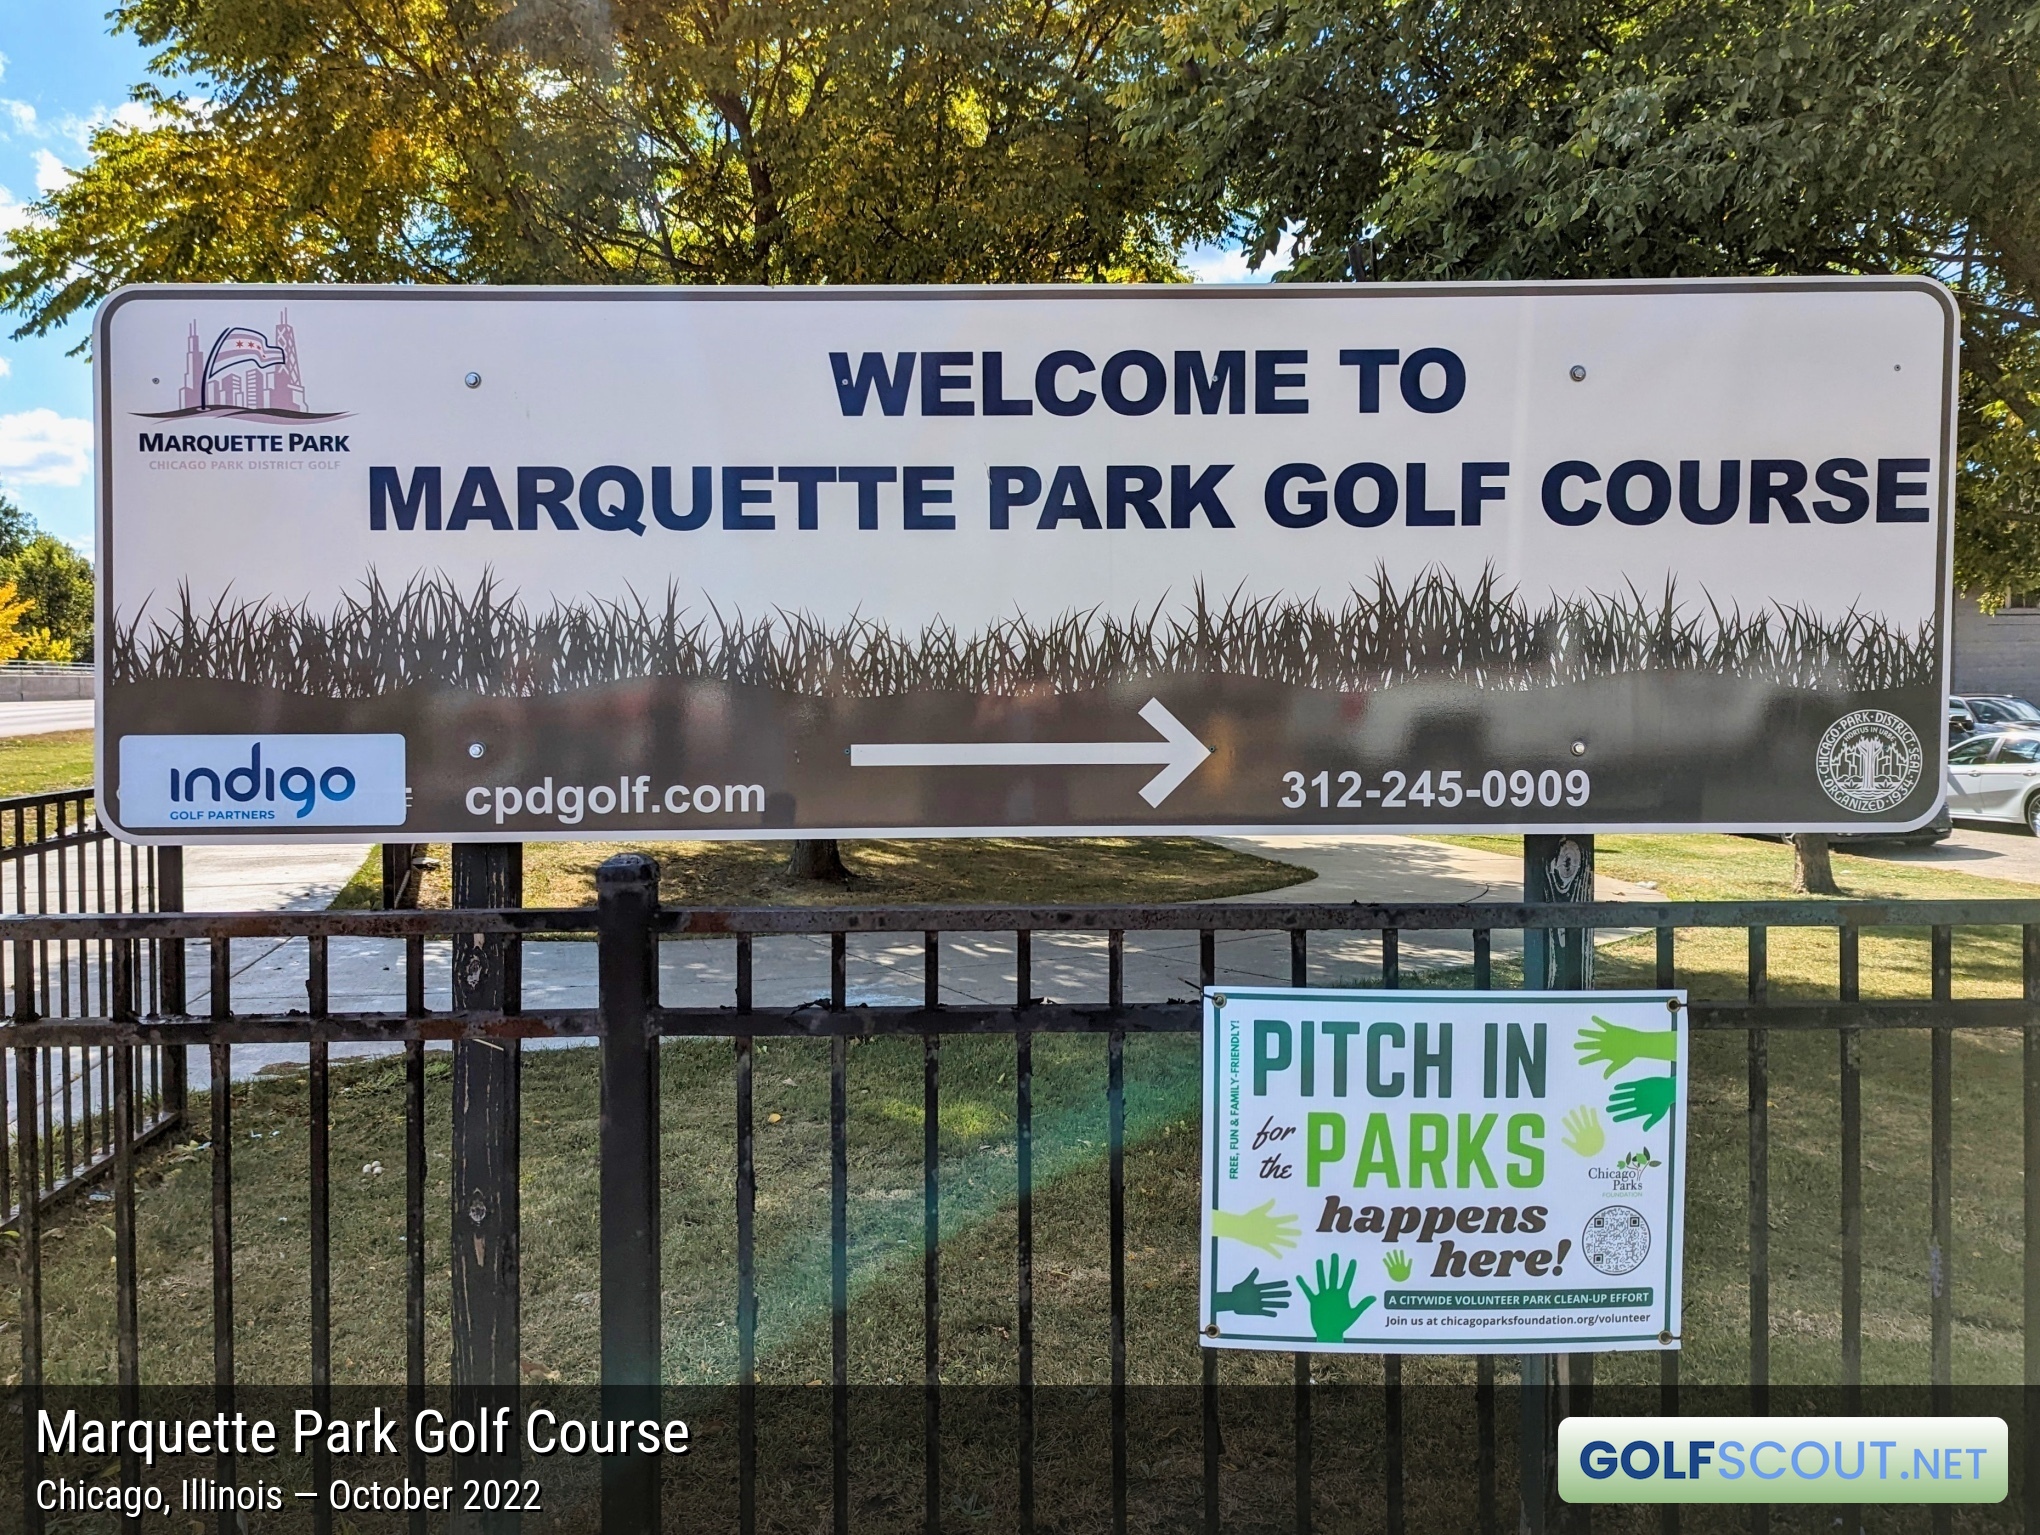 Sign at the entrance to Marquette Park Golf Course